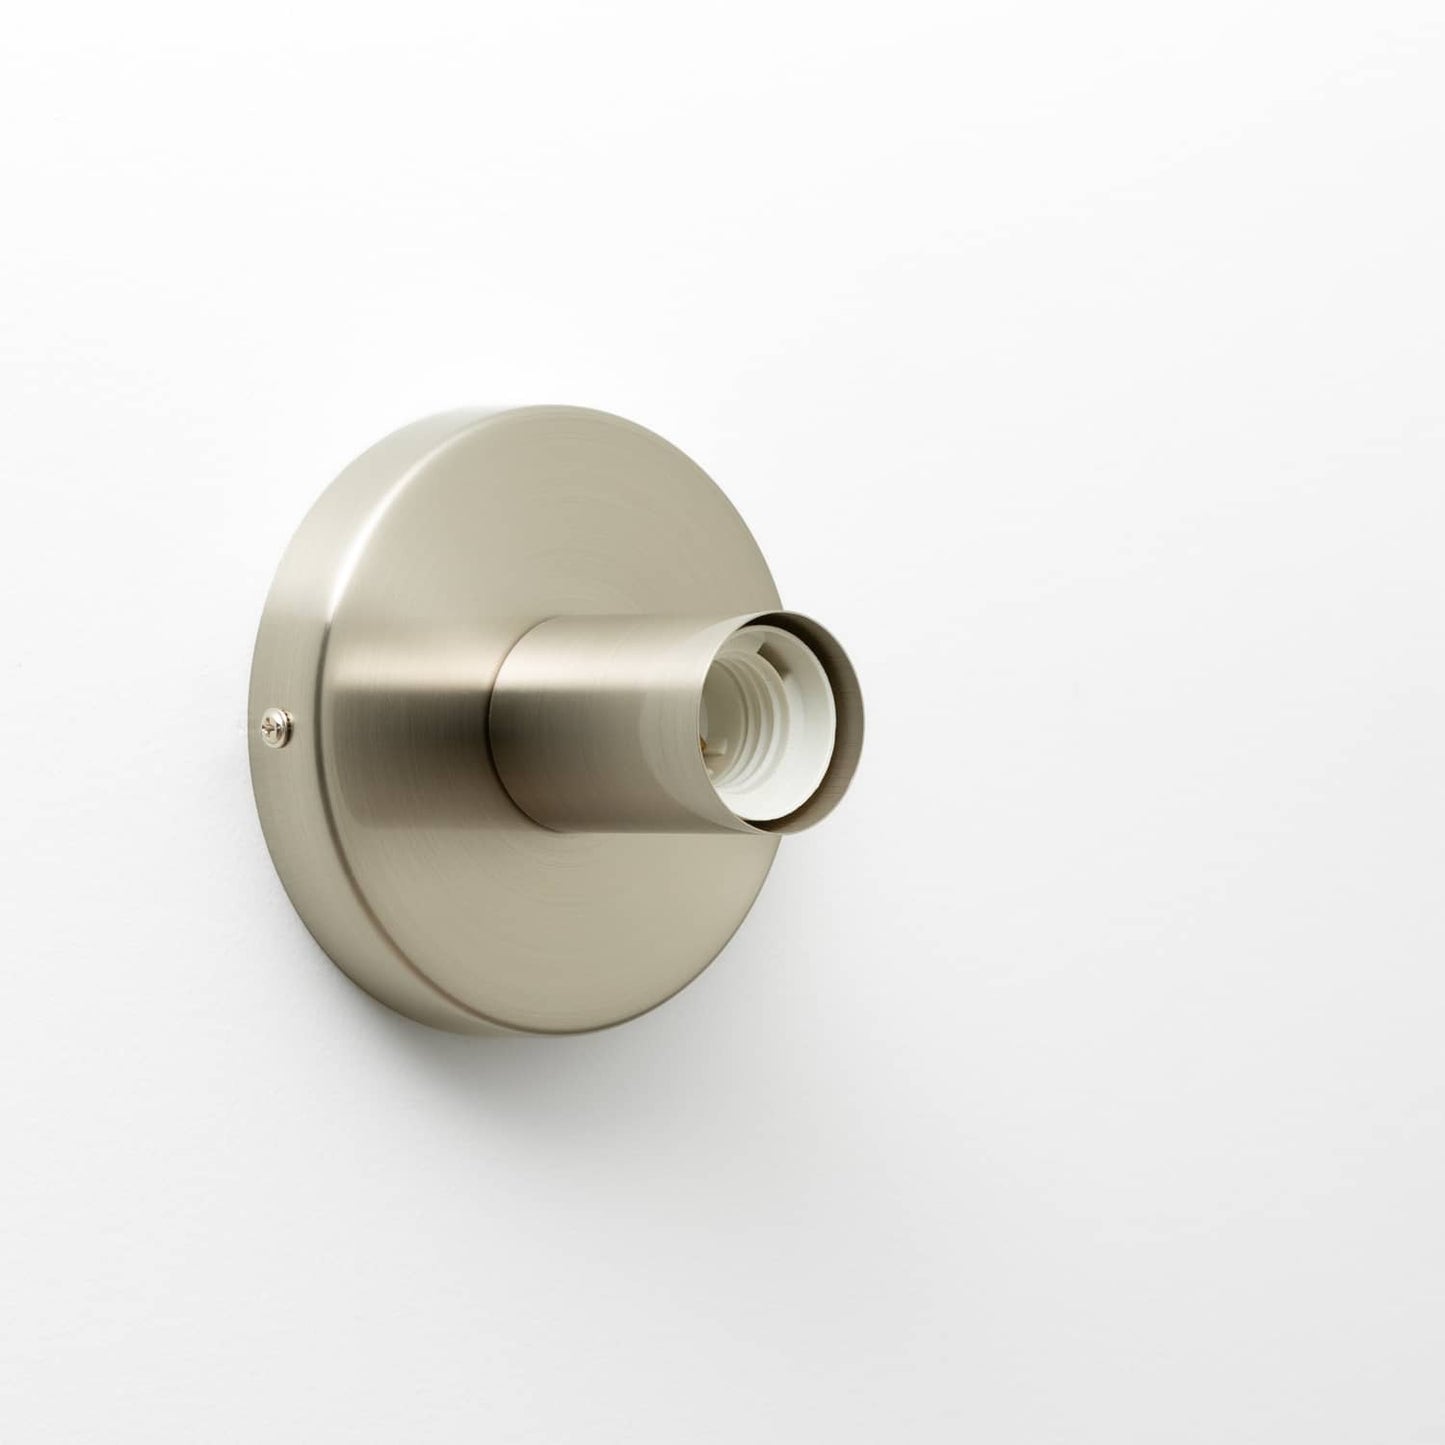 Button Light in Brushed Nickel finish